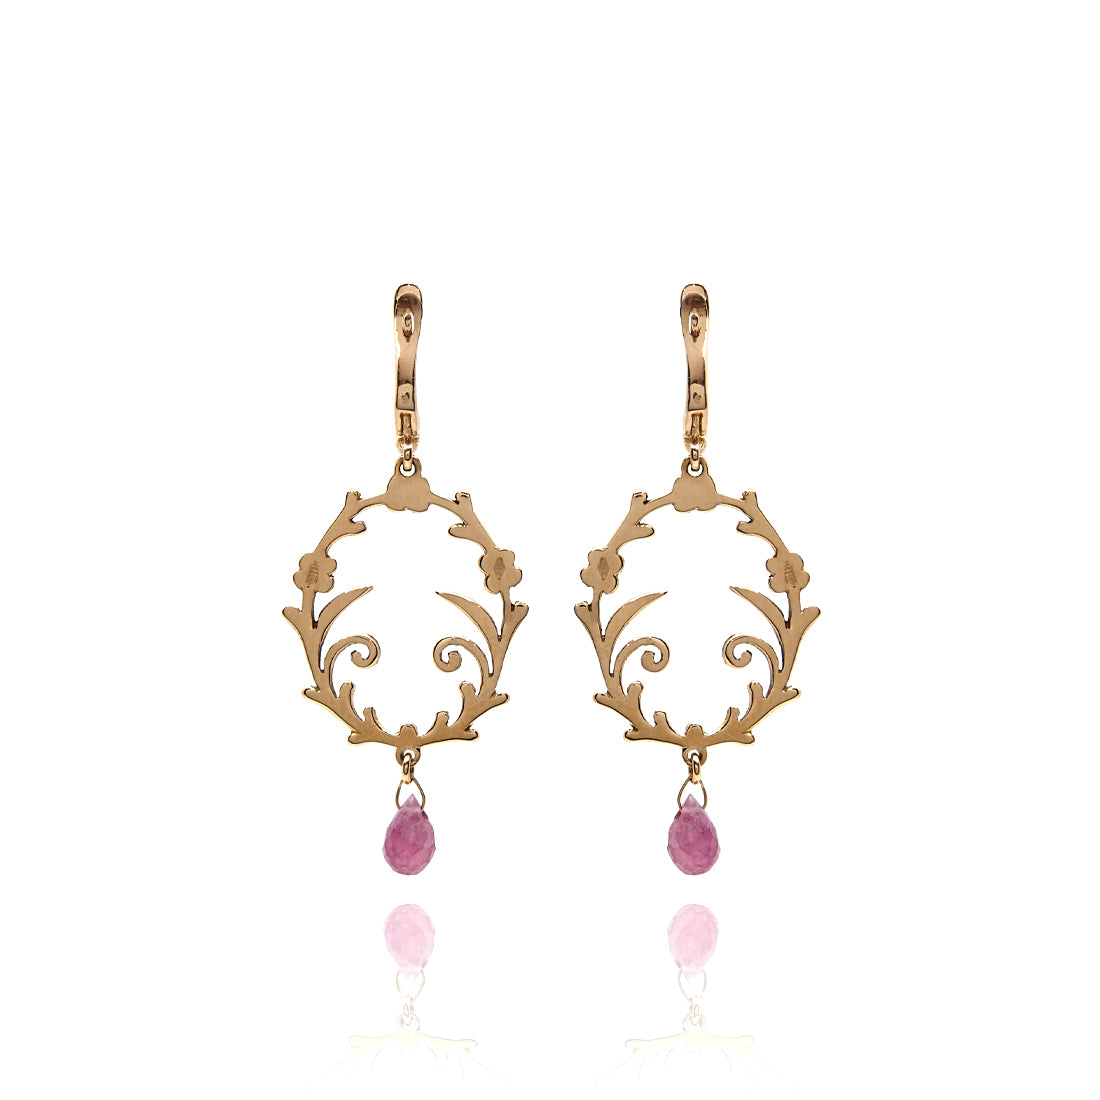 Rose gold earrings with tourmaline.